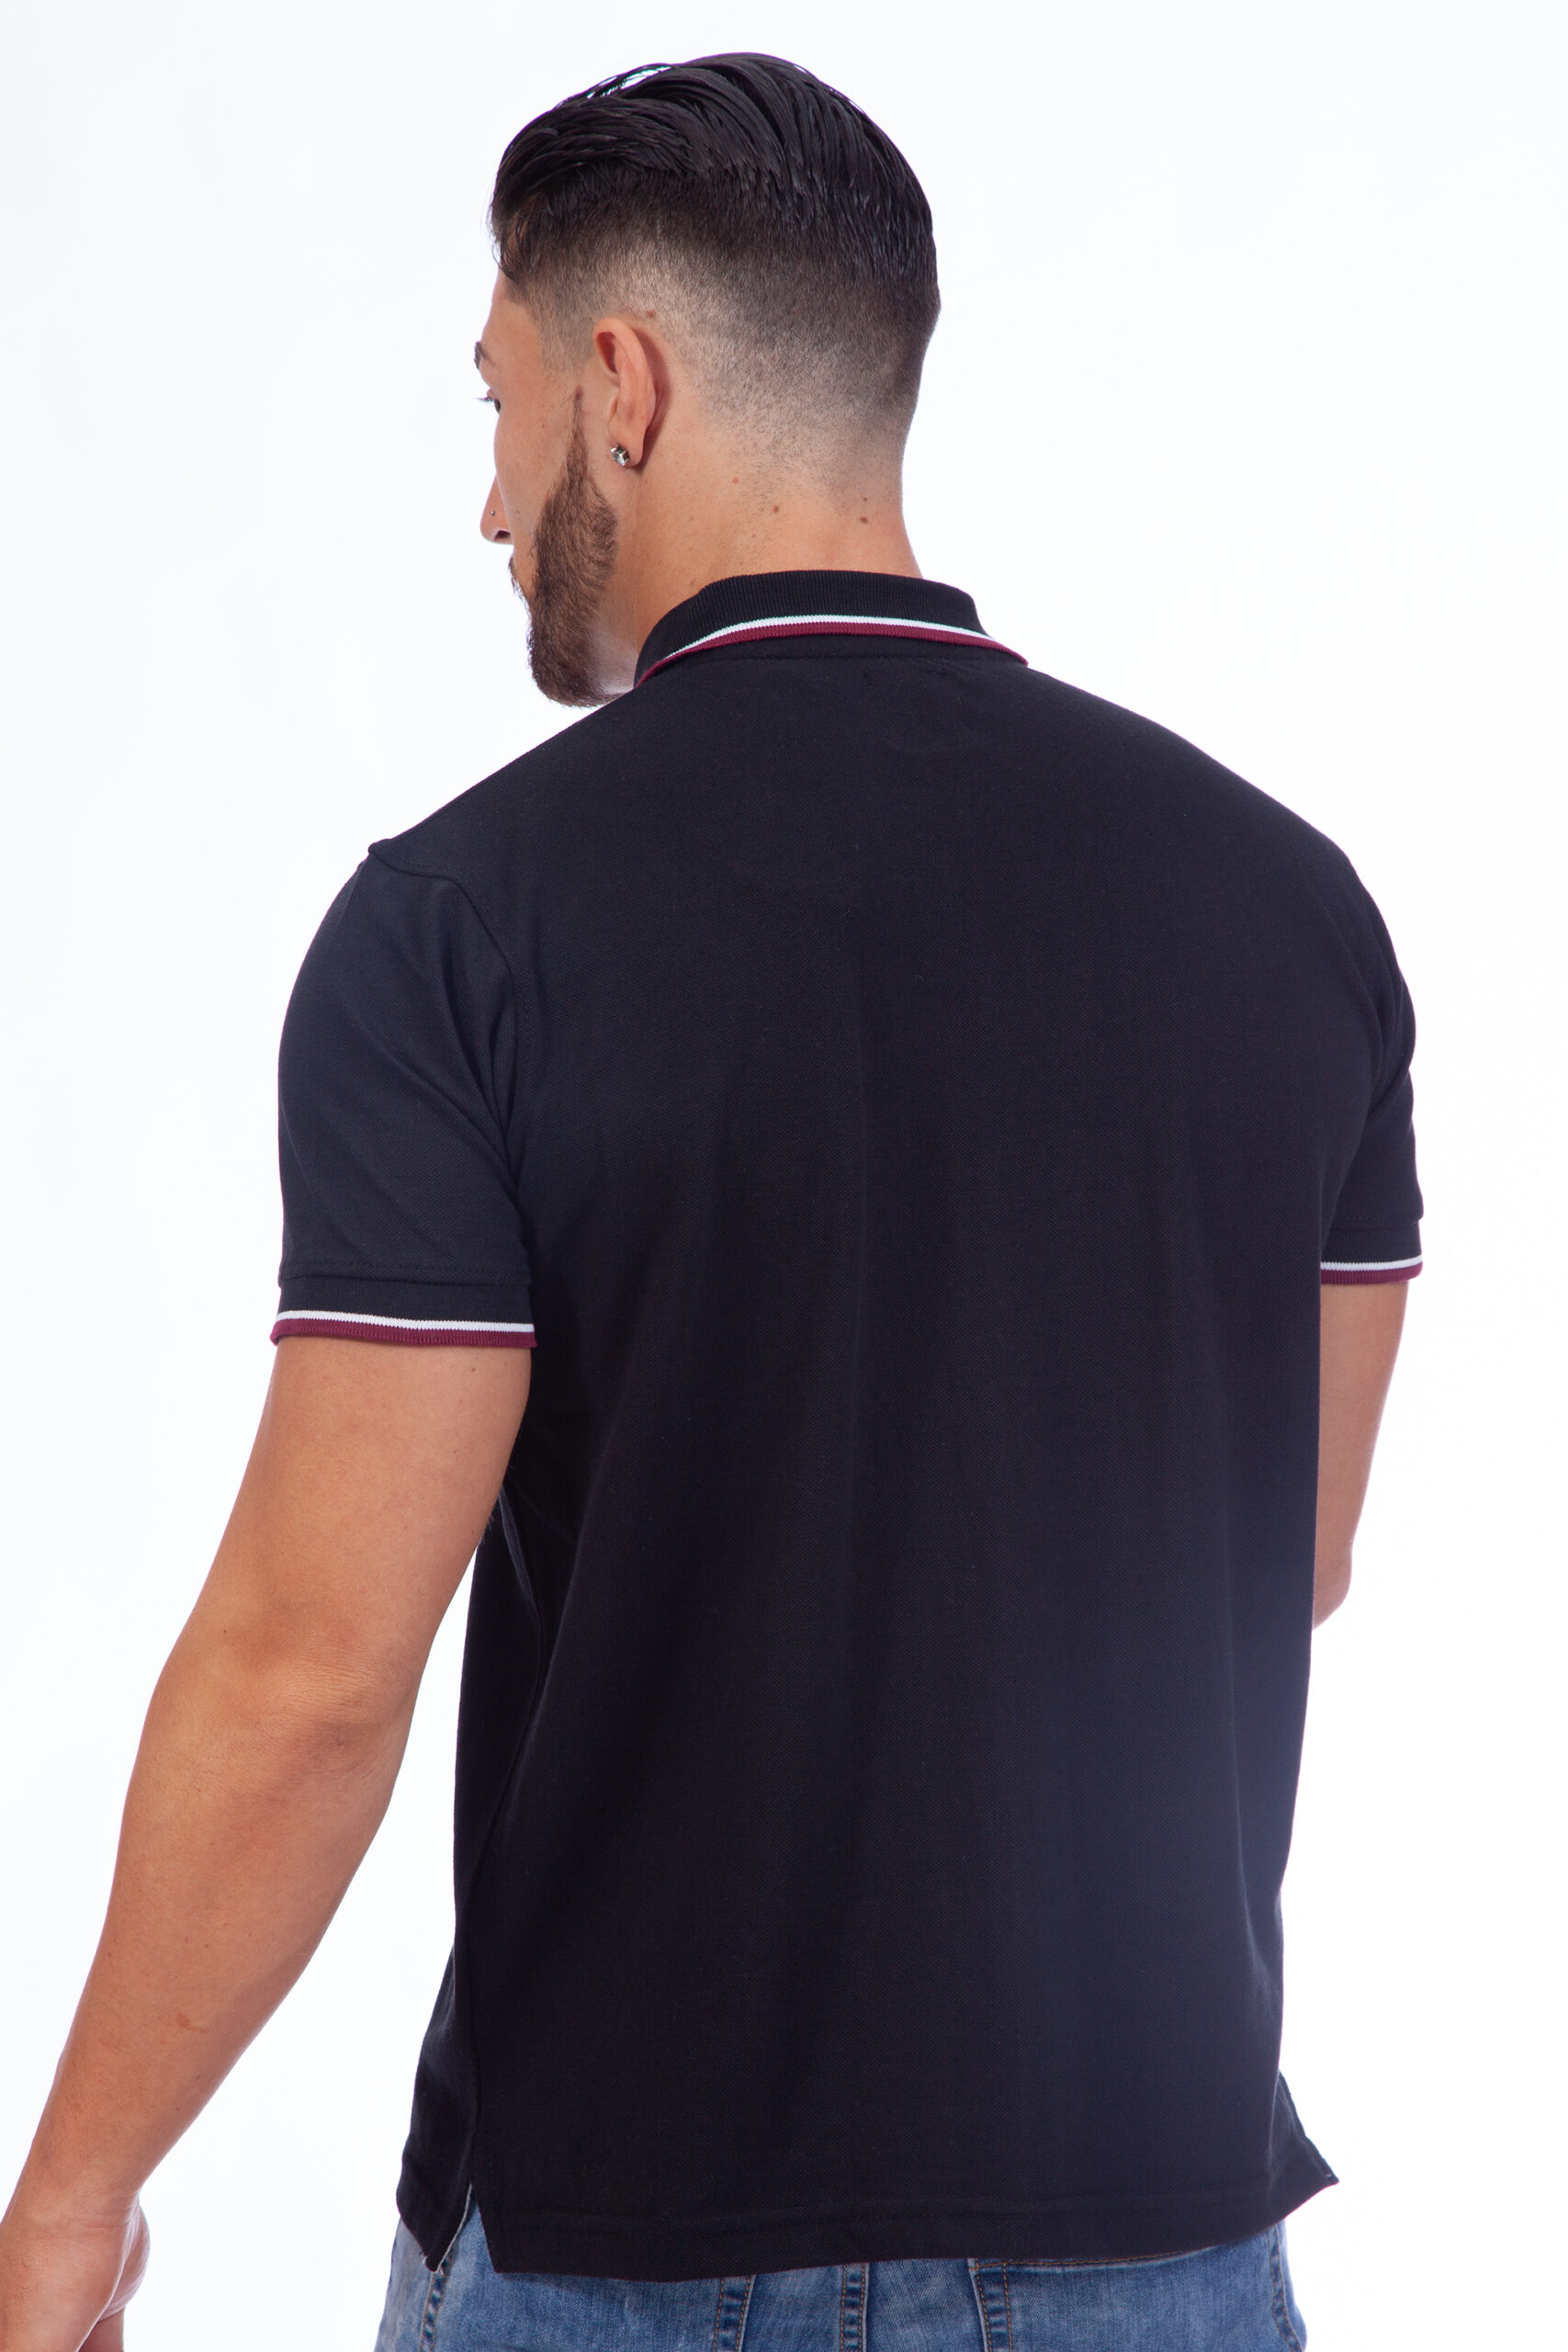 Lion Polo Shirt - Twisted Soul | Men's Clothing